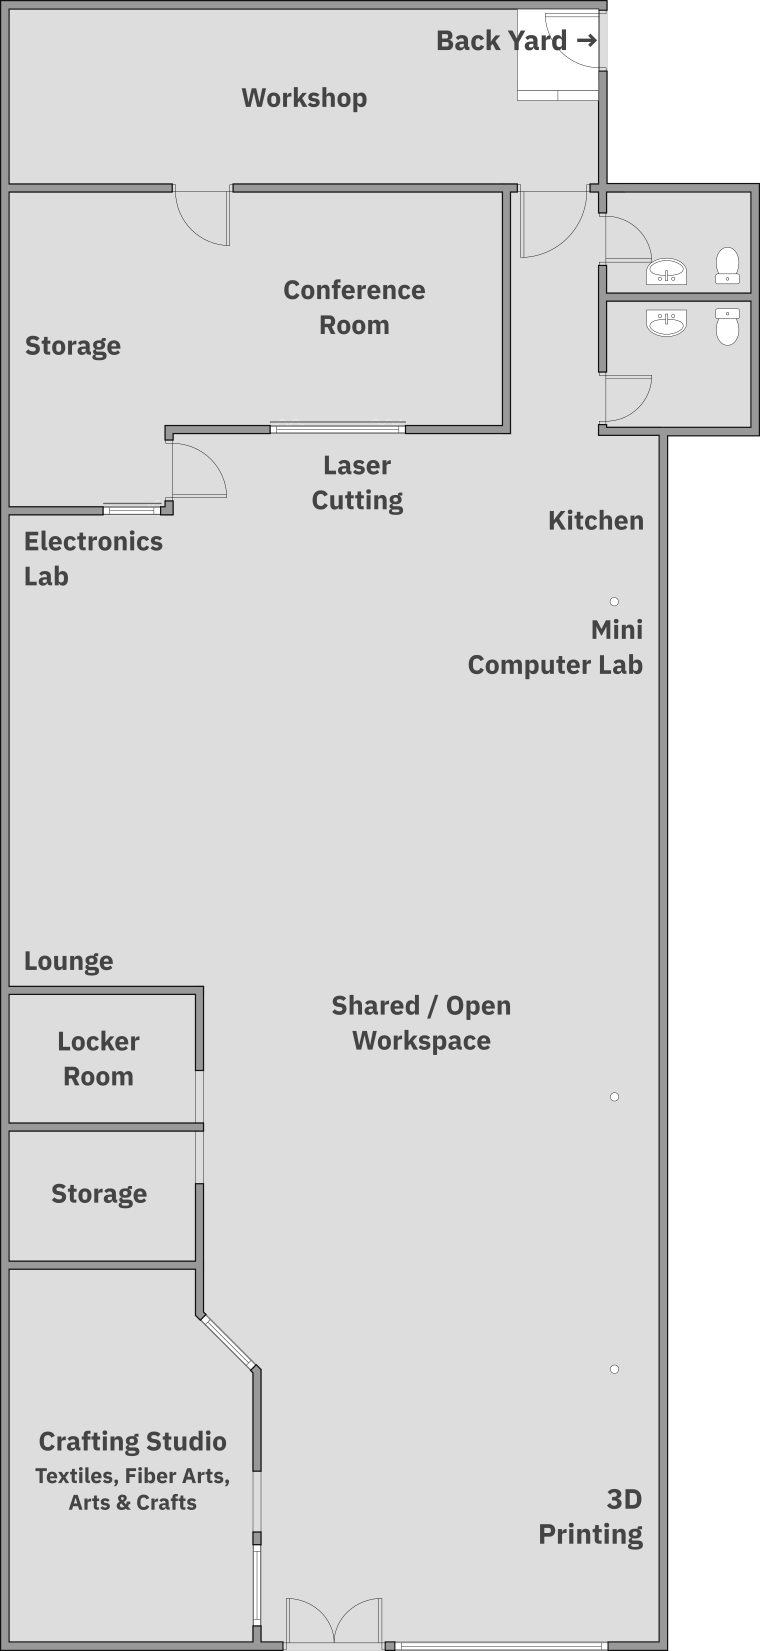 Image of the Root Access floorplan.